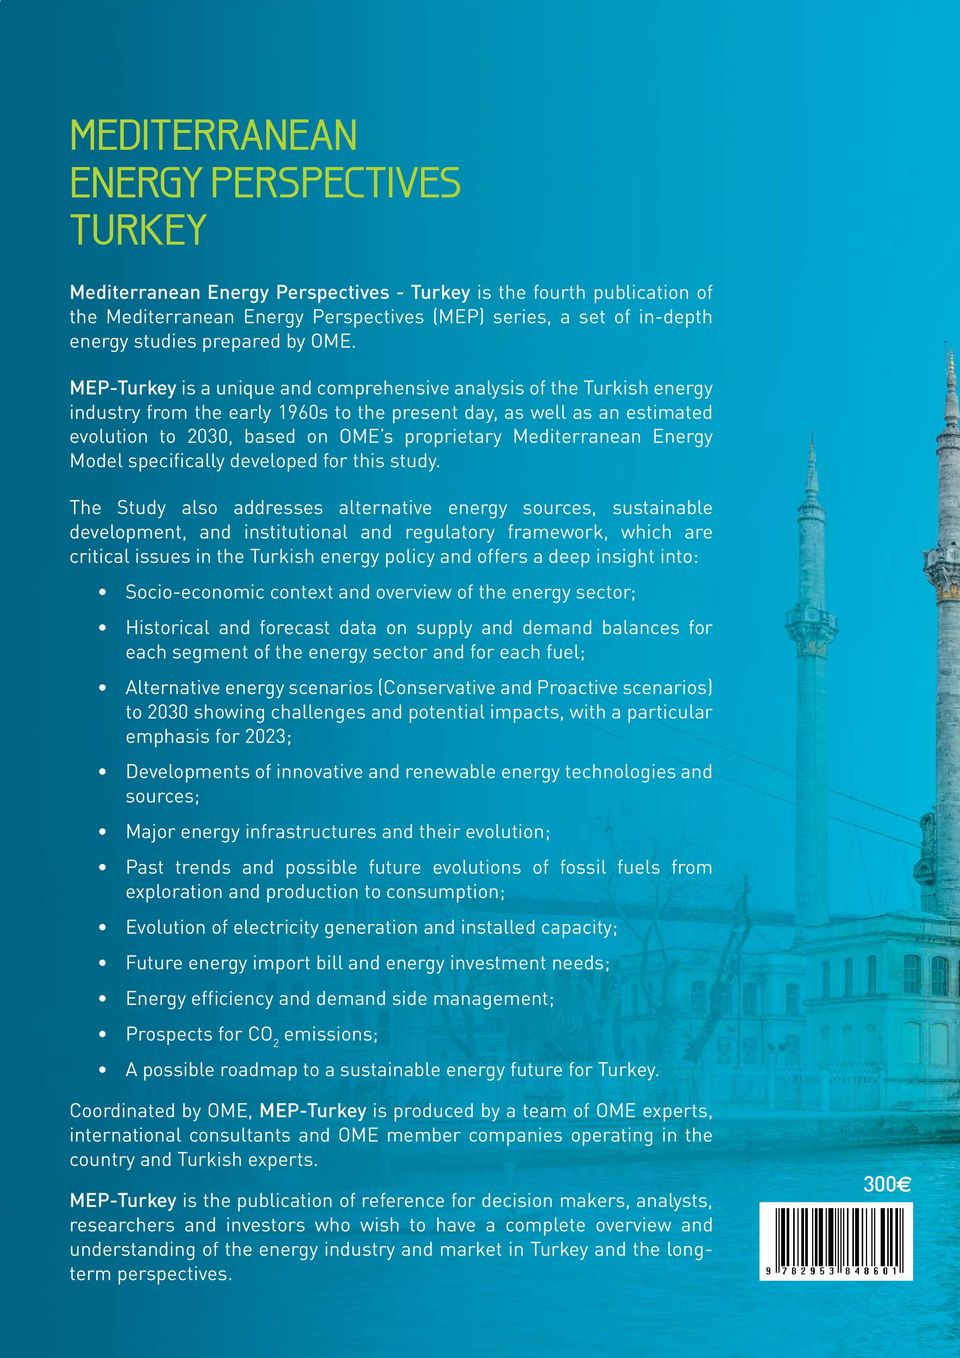 MEP-Turkey is a unique and comprehensive analysis of the Turkish energy industry from the early 1960s to the present day, as well as an estimated evolution to 2030, based on OME s proprietary